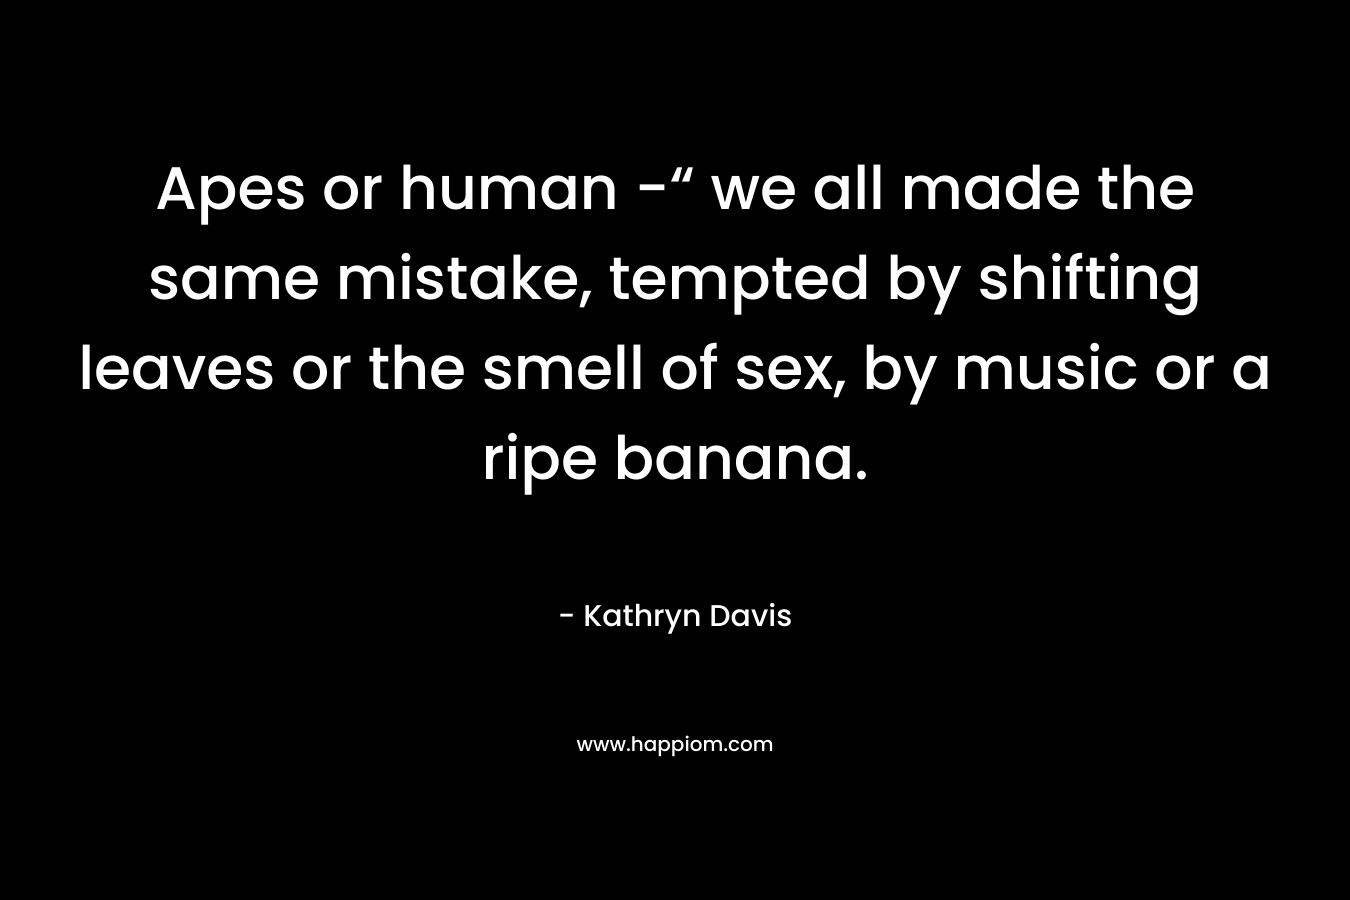 Apes or human -“ we all made the same mistake, tempted by shifting leaves or the smell of sex, by music or a ripe banana.